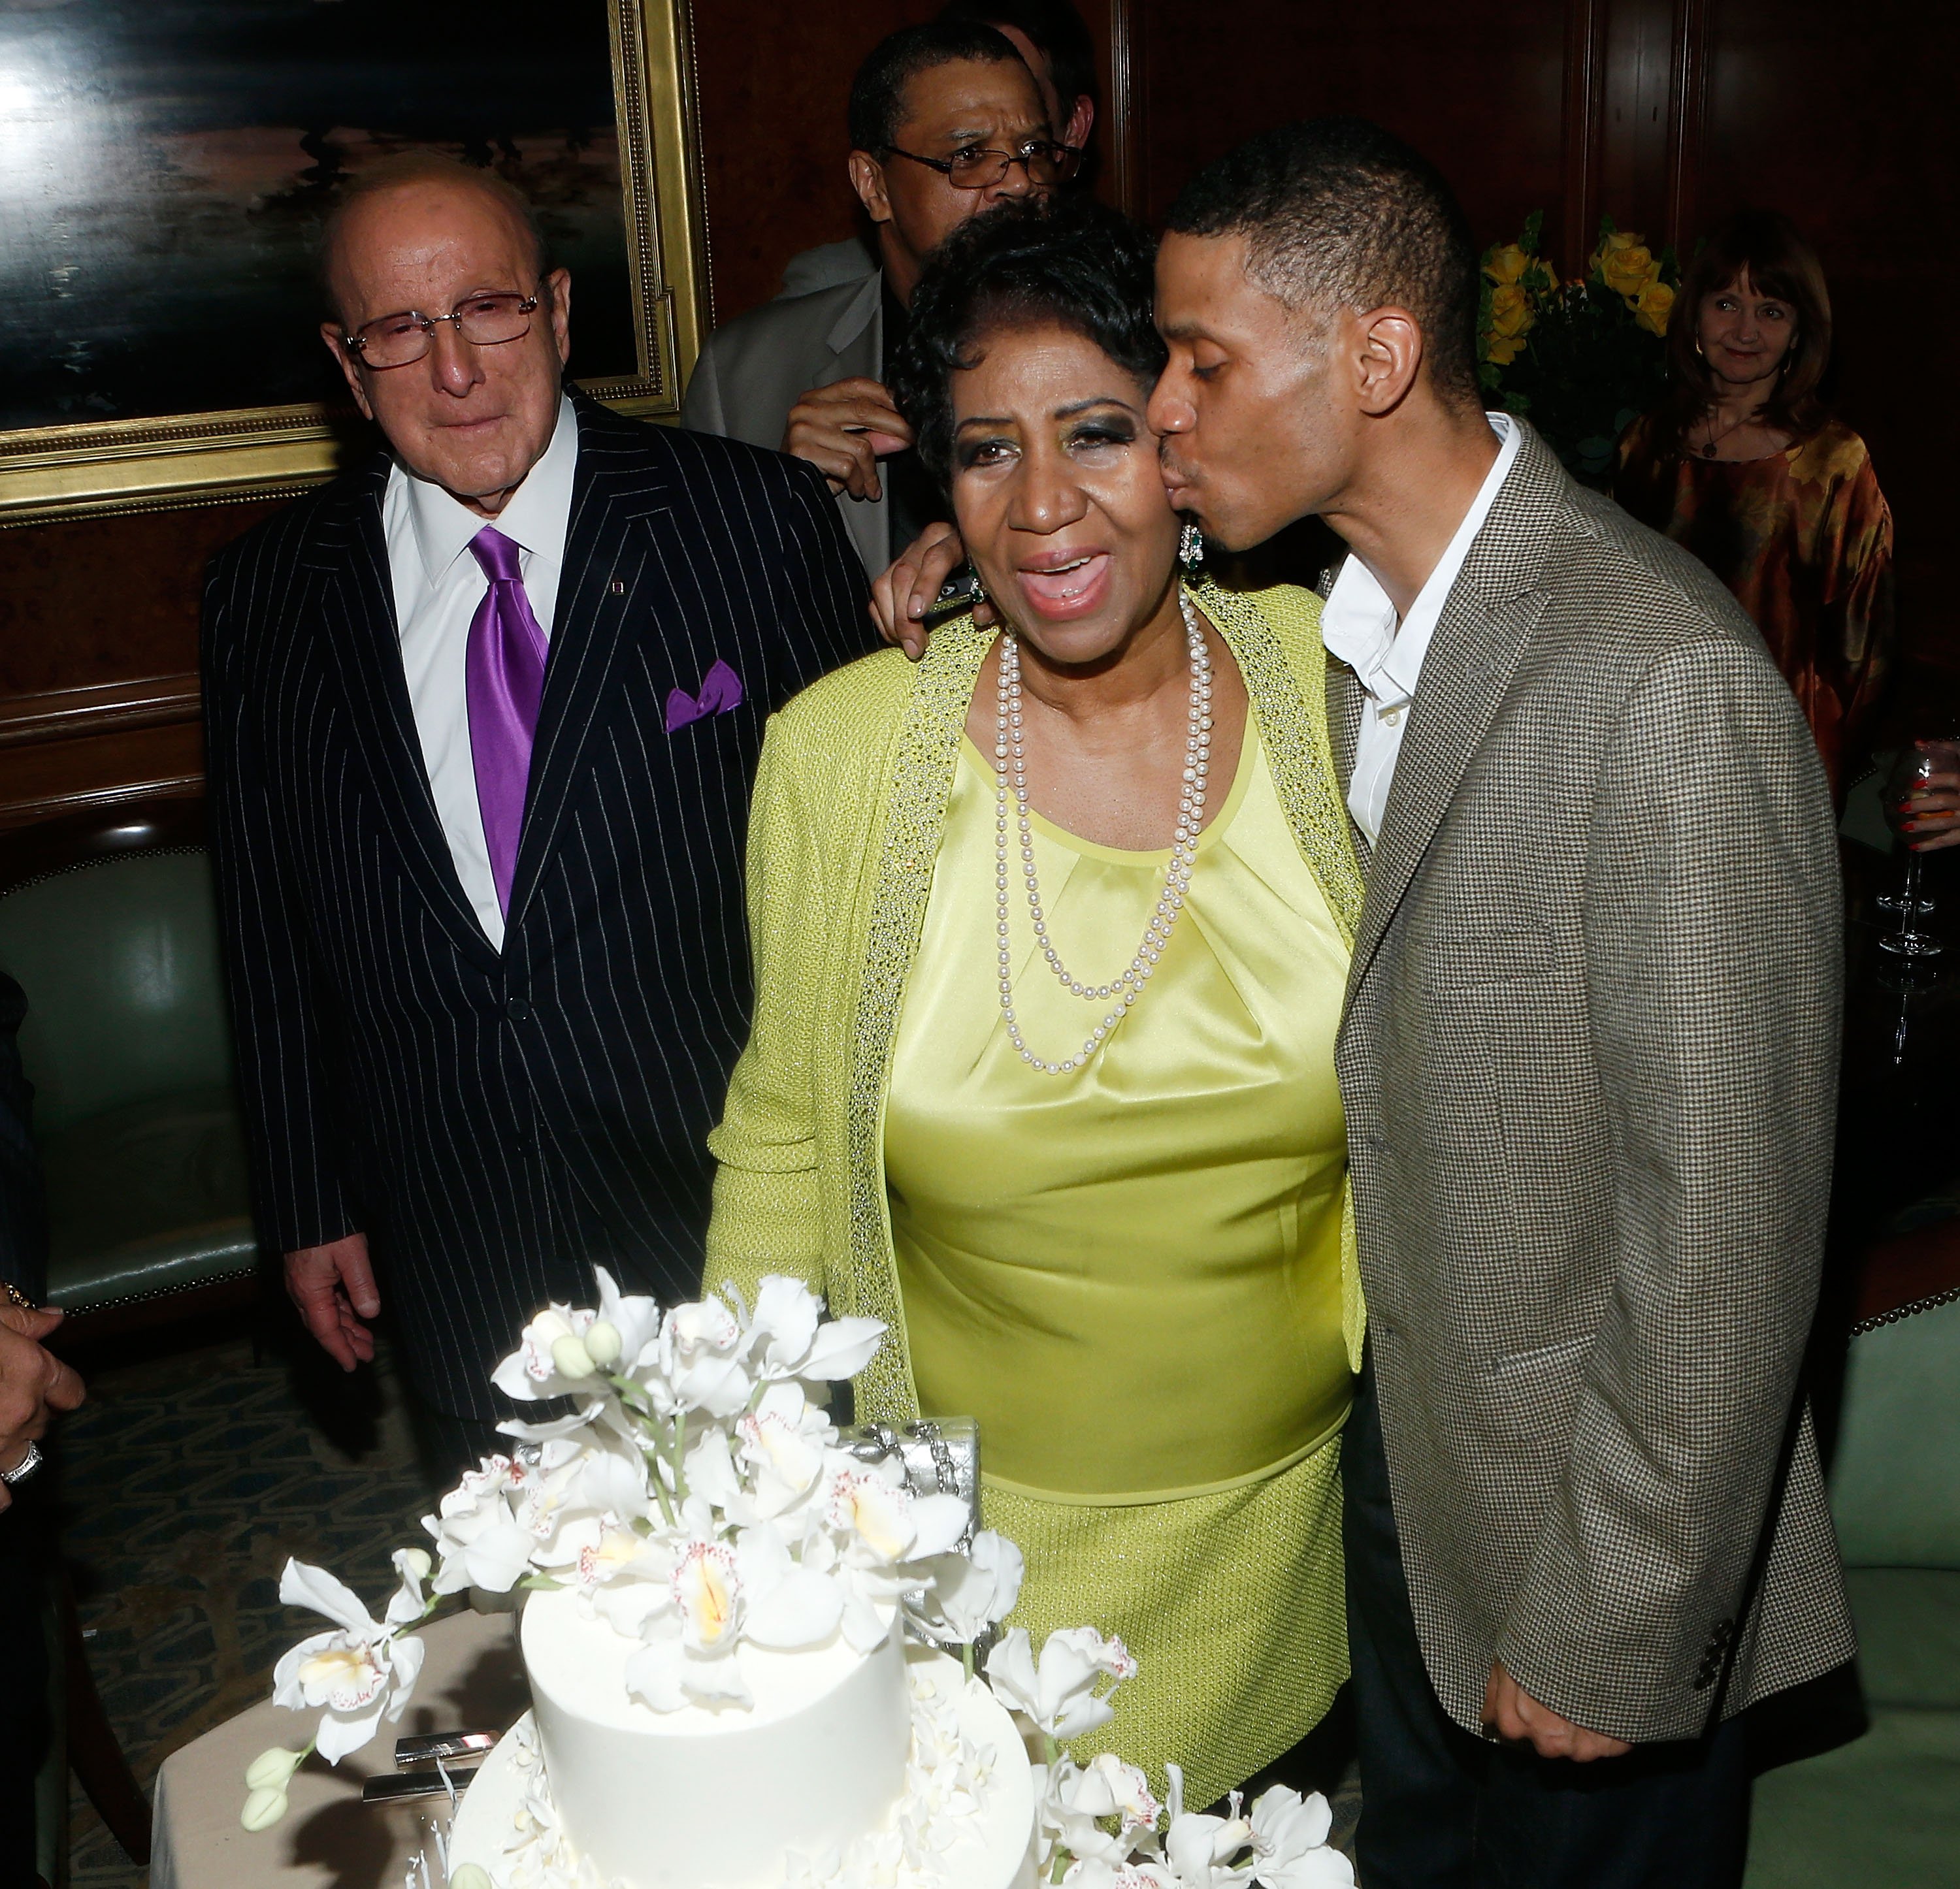  Clive Davis, Aretha Franklin and Kecalf Cunningham at Aretha Franklin's 72nd Birthday Celebration on March 22, 2014 in New York City | Source: Getty Images